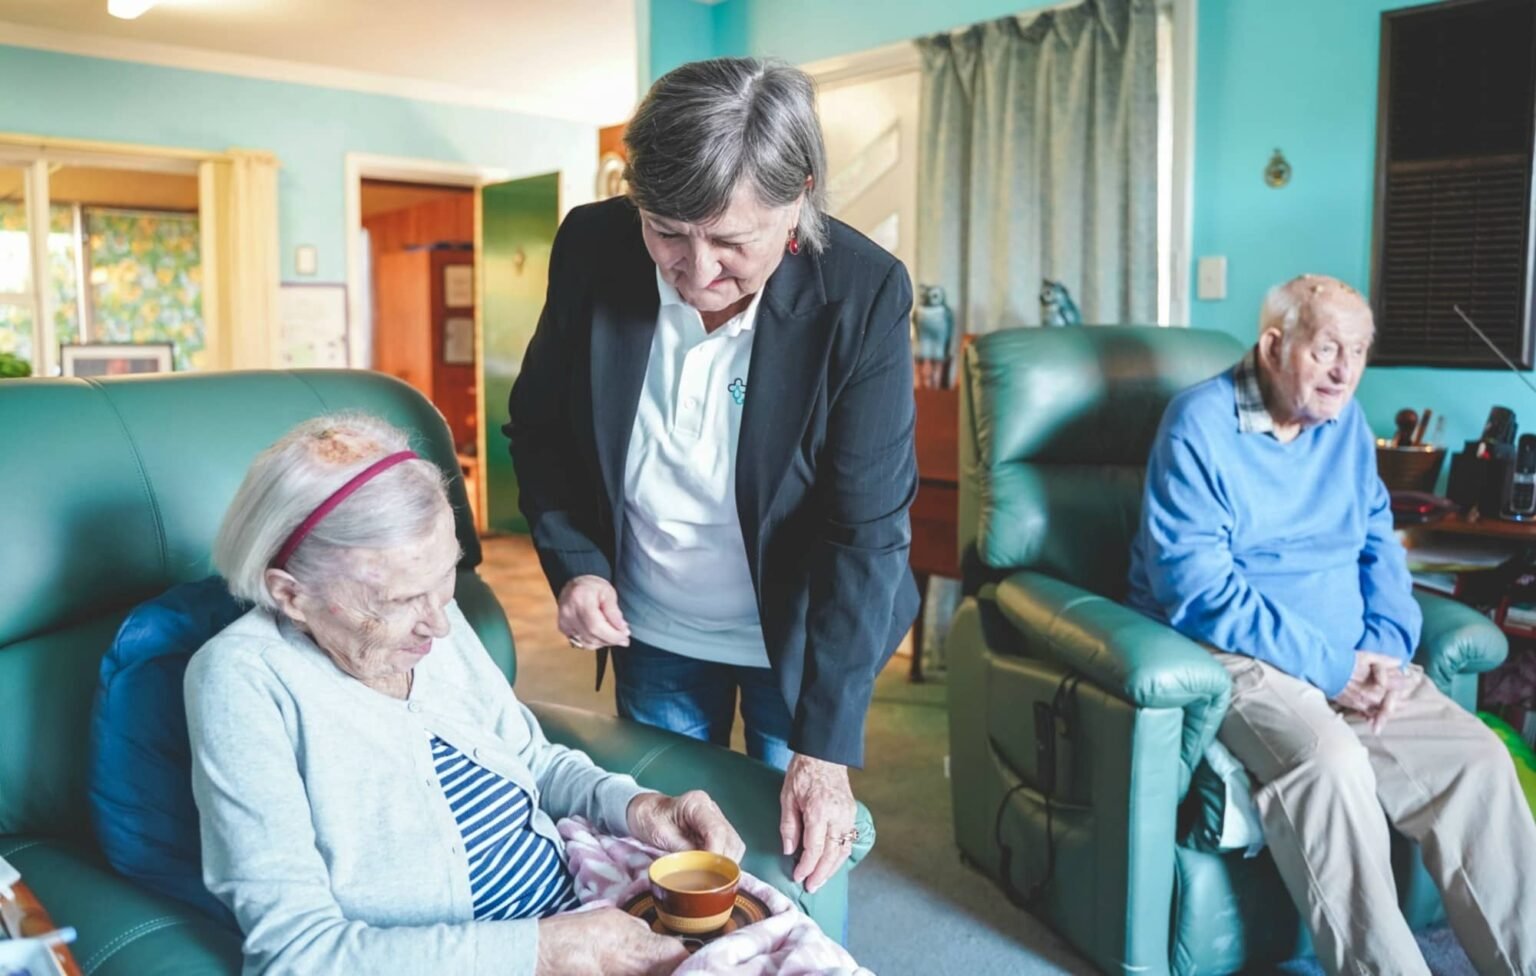 24 hour care at home for elderly